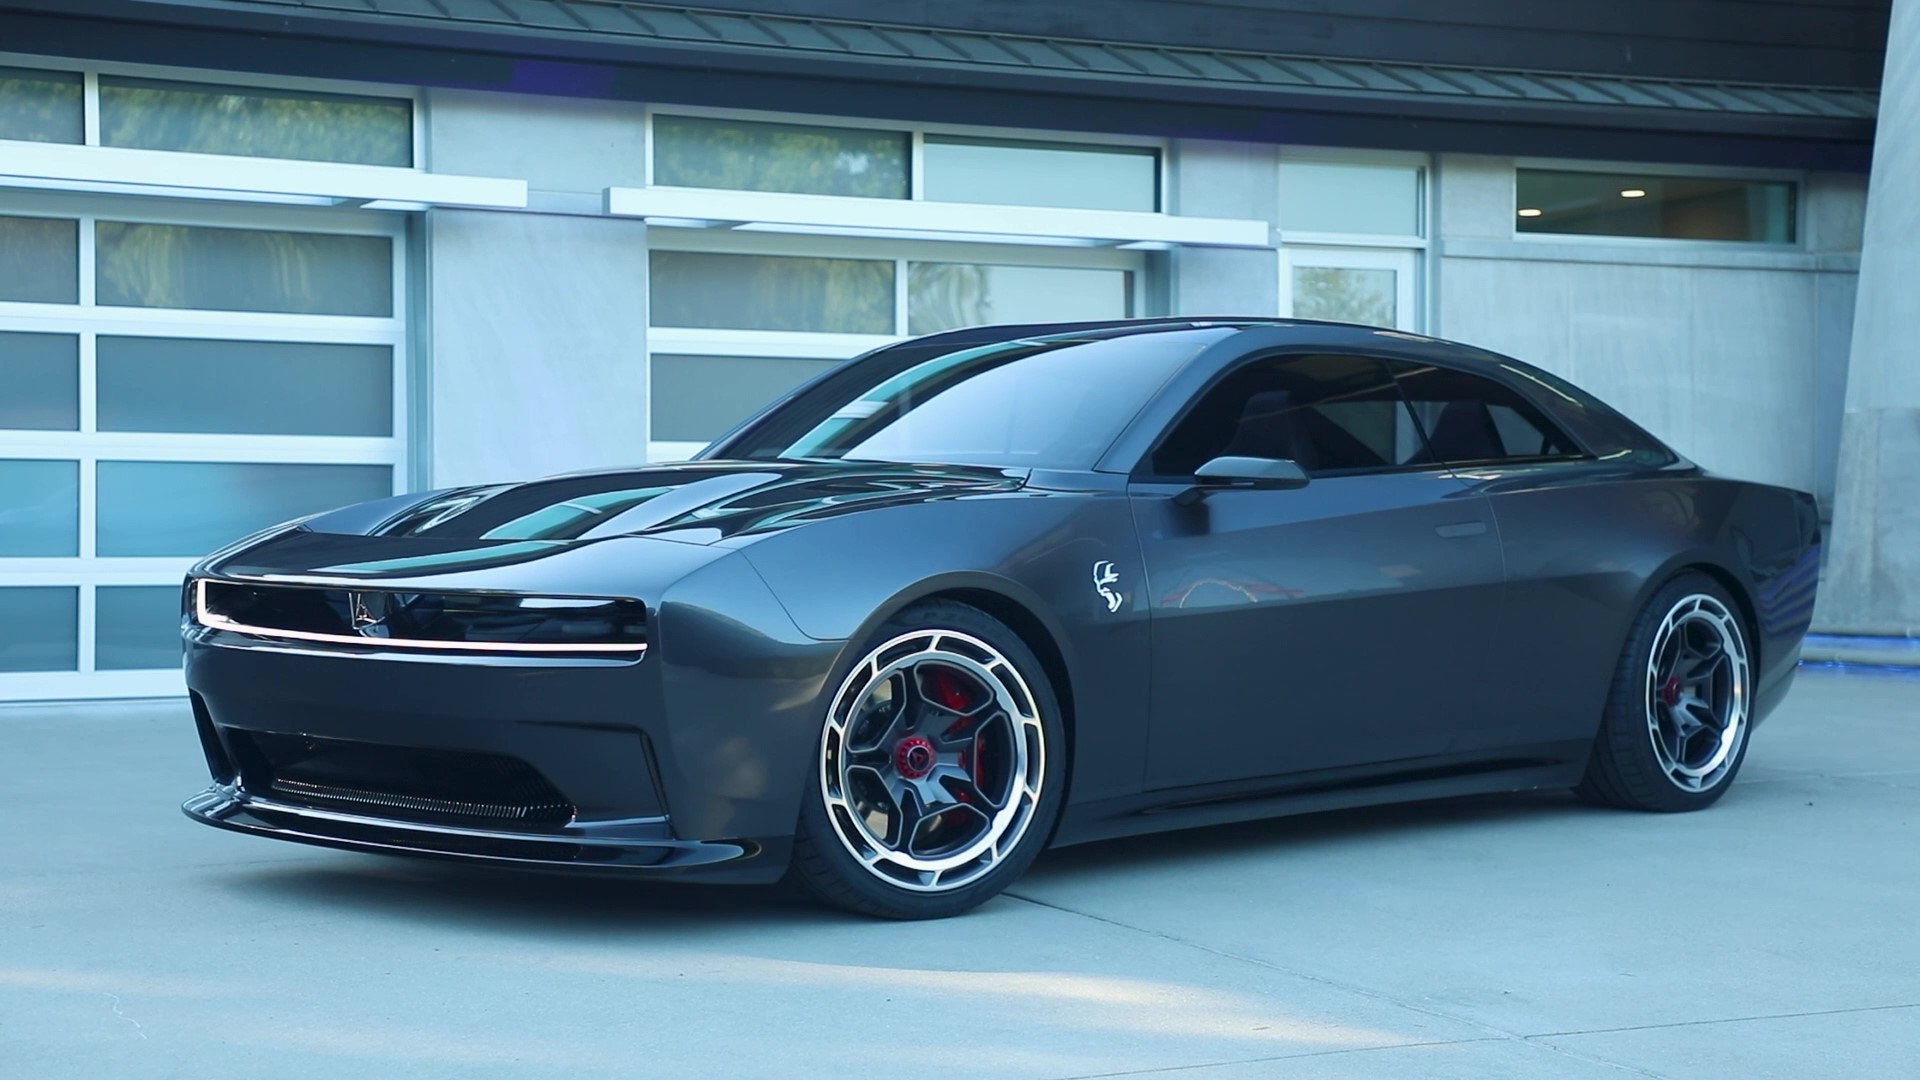  :  Dodge Charger  Challenger    ()